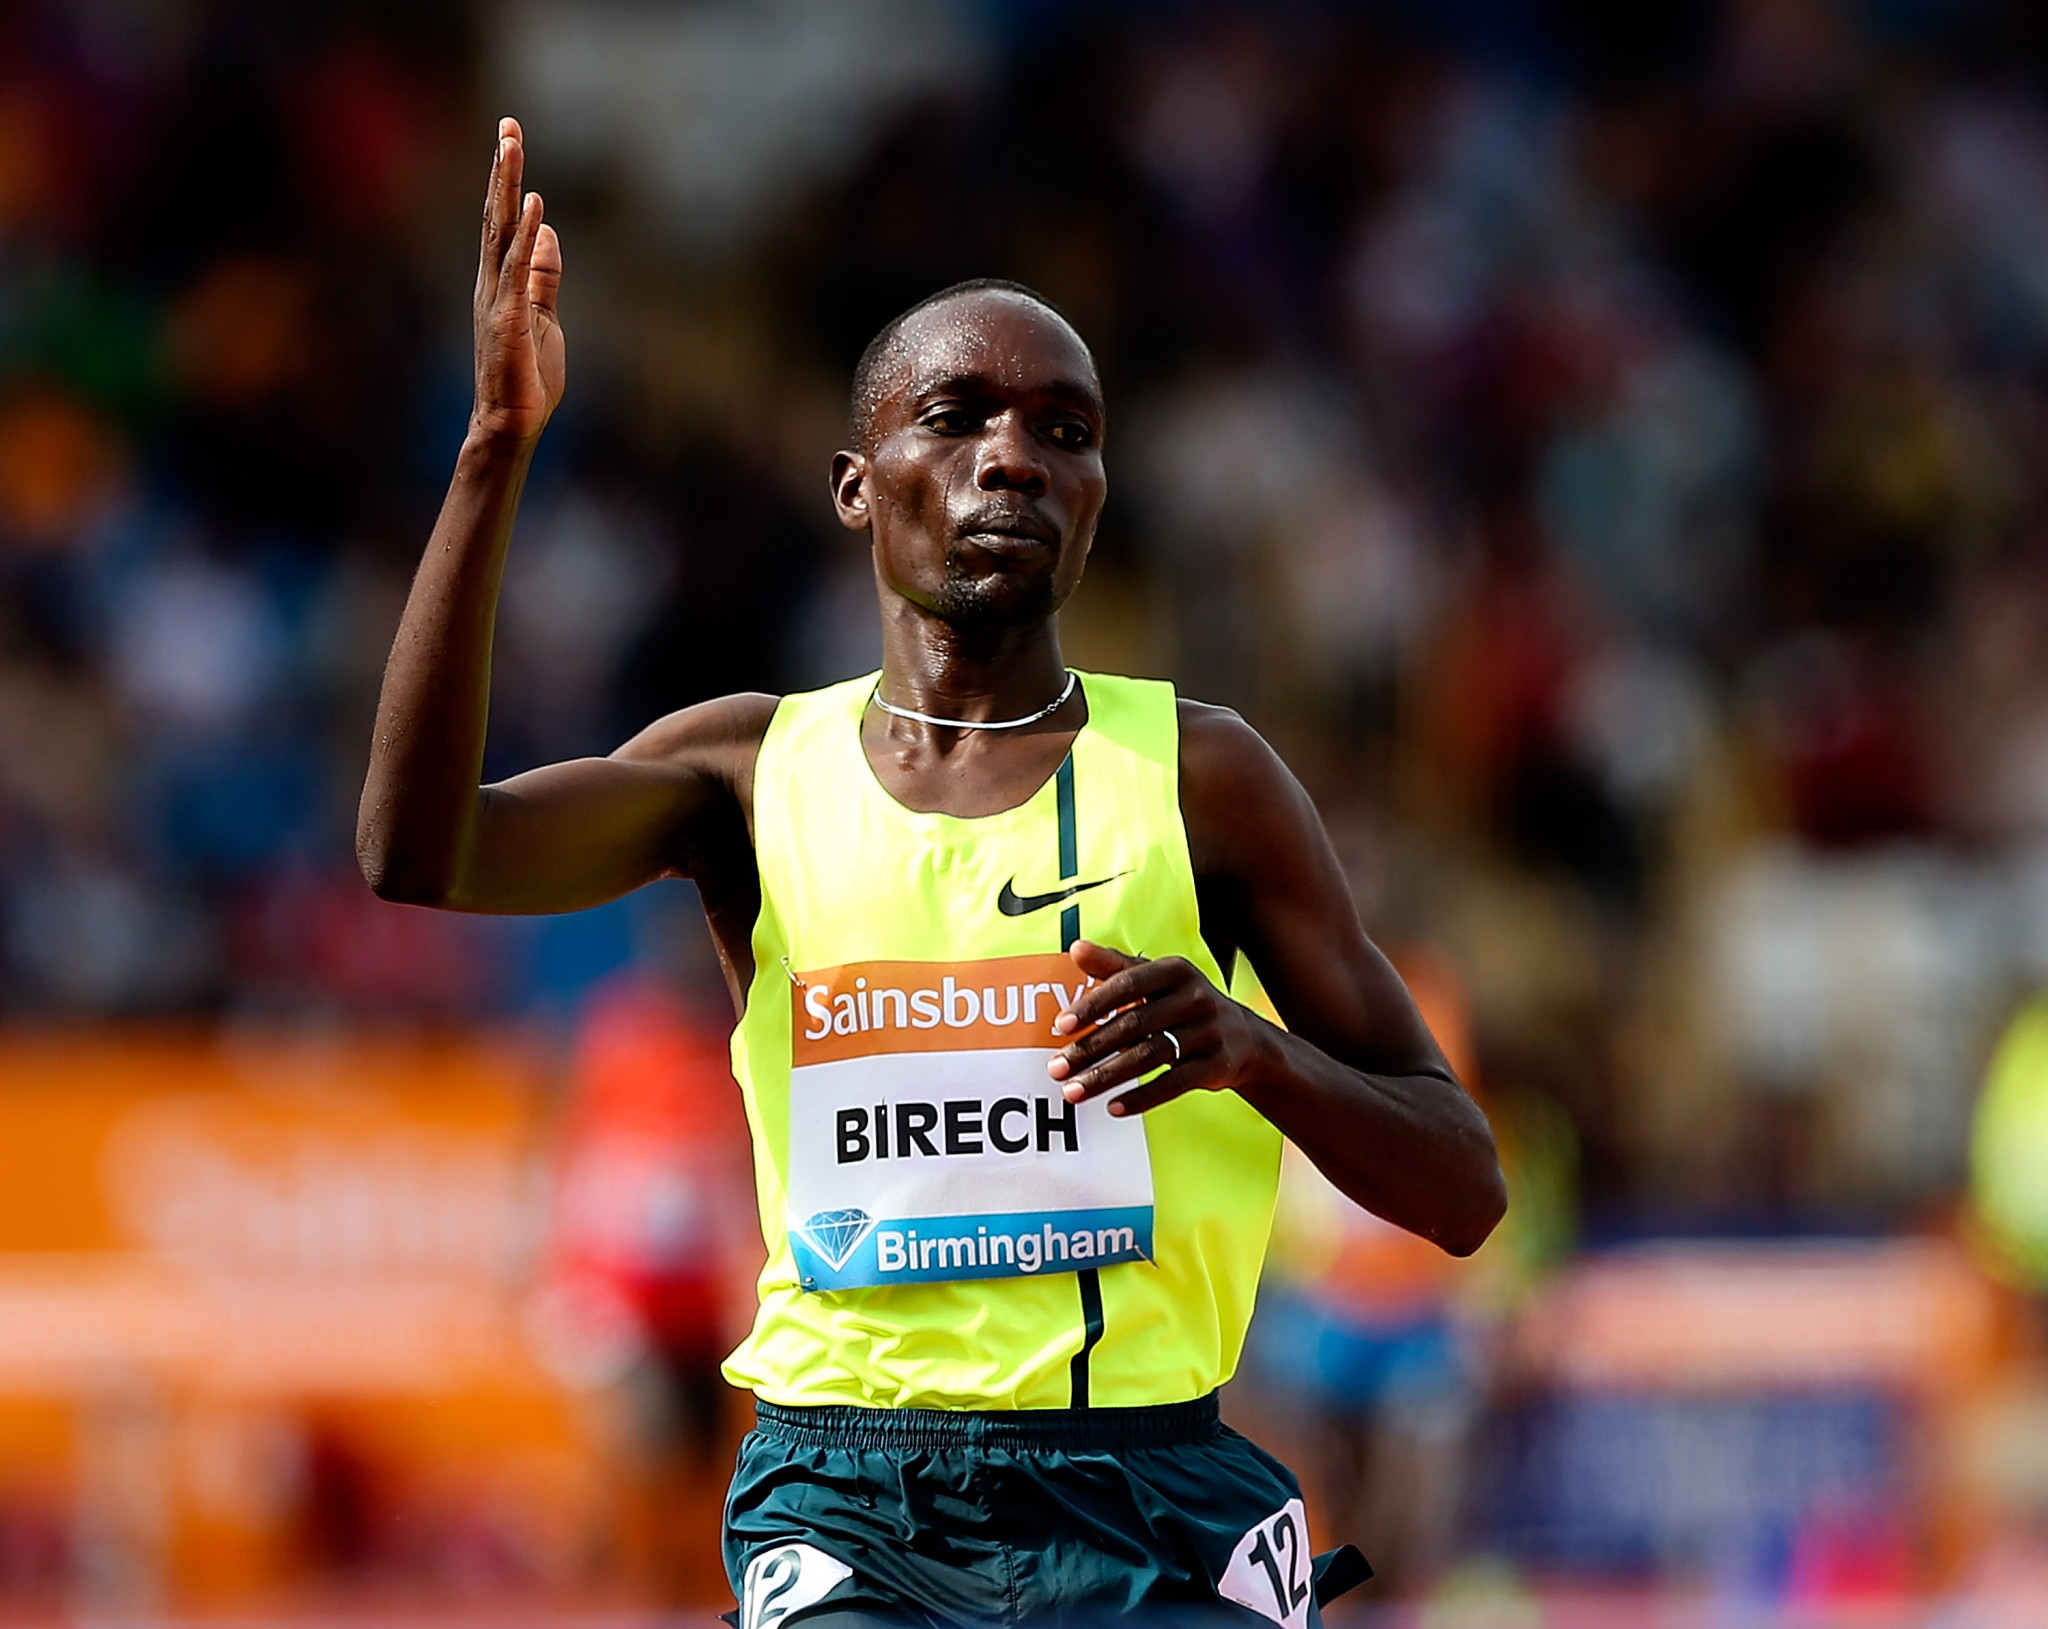 Birech wins men's race as steeplechasers dominate at IAAF Cross Country Permit in San Vittore